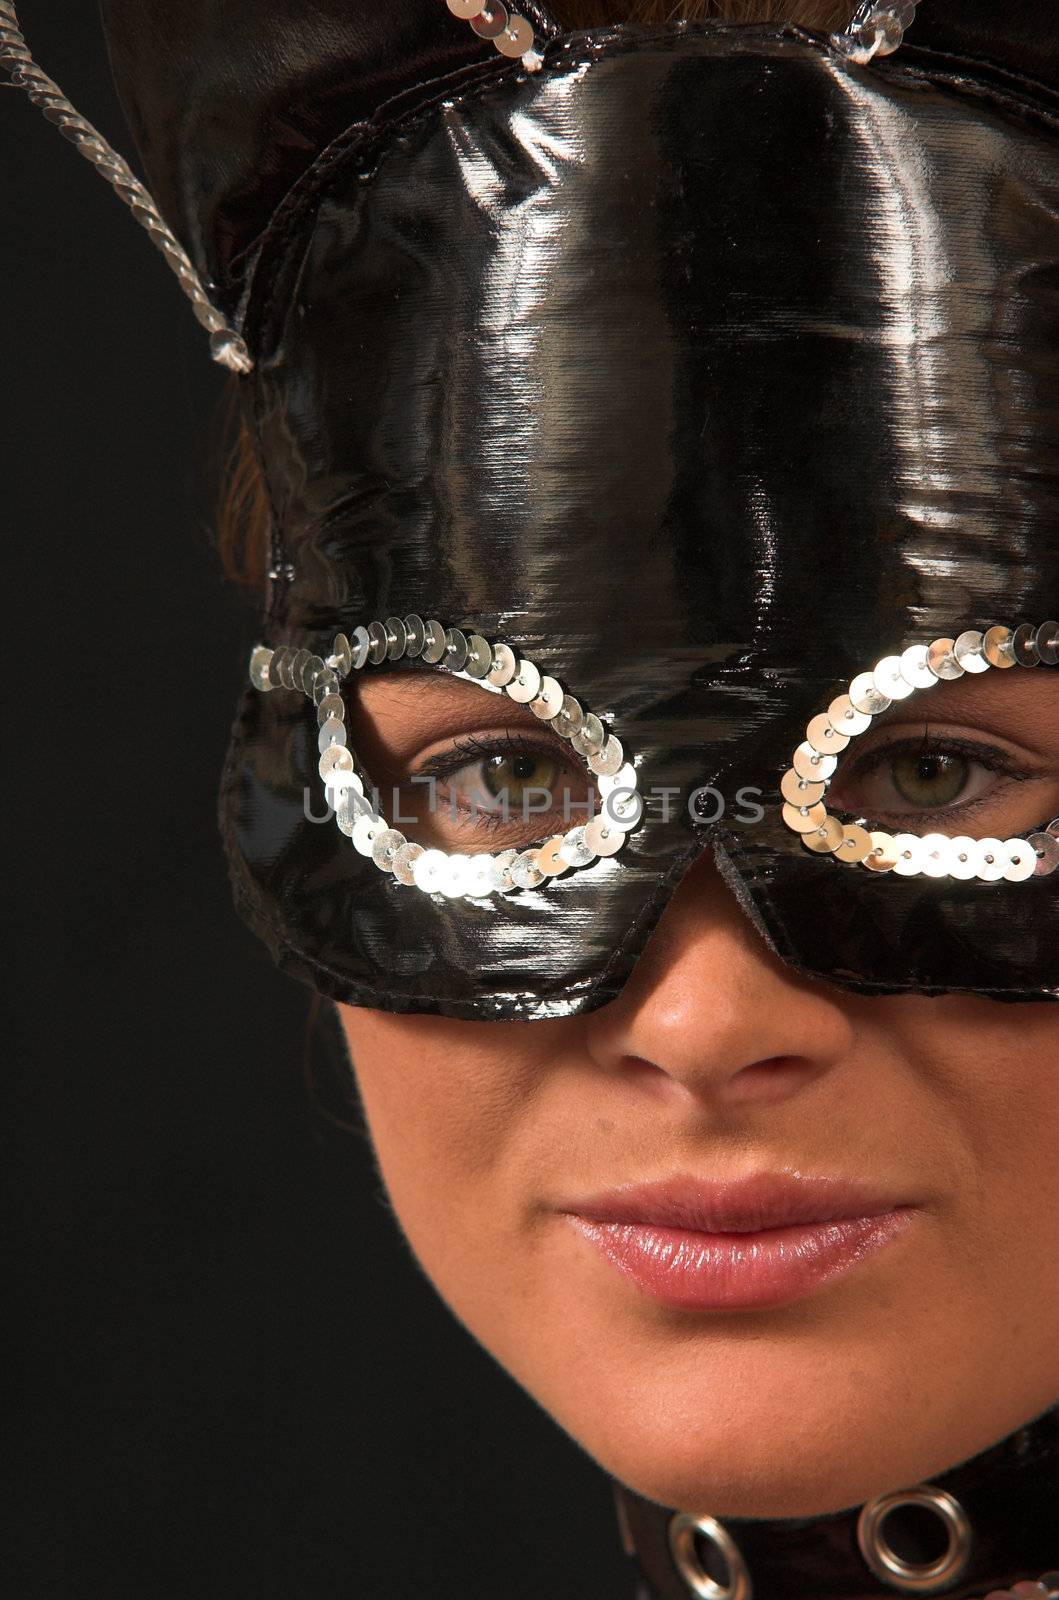 Cat Suit model with black mask and collar